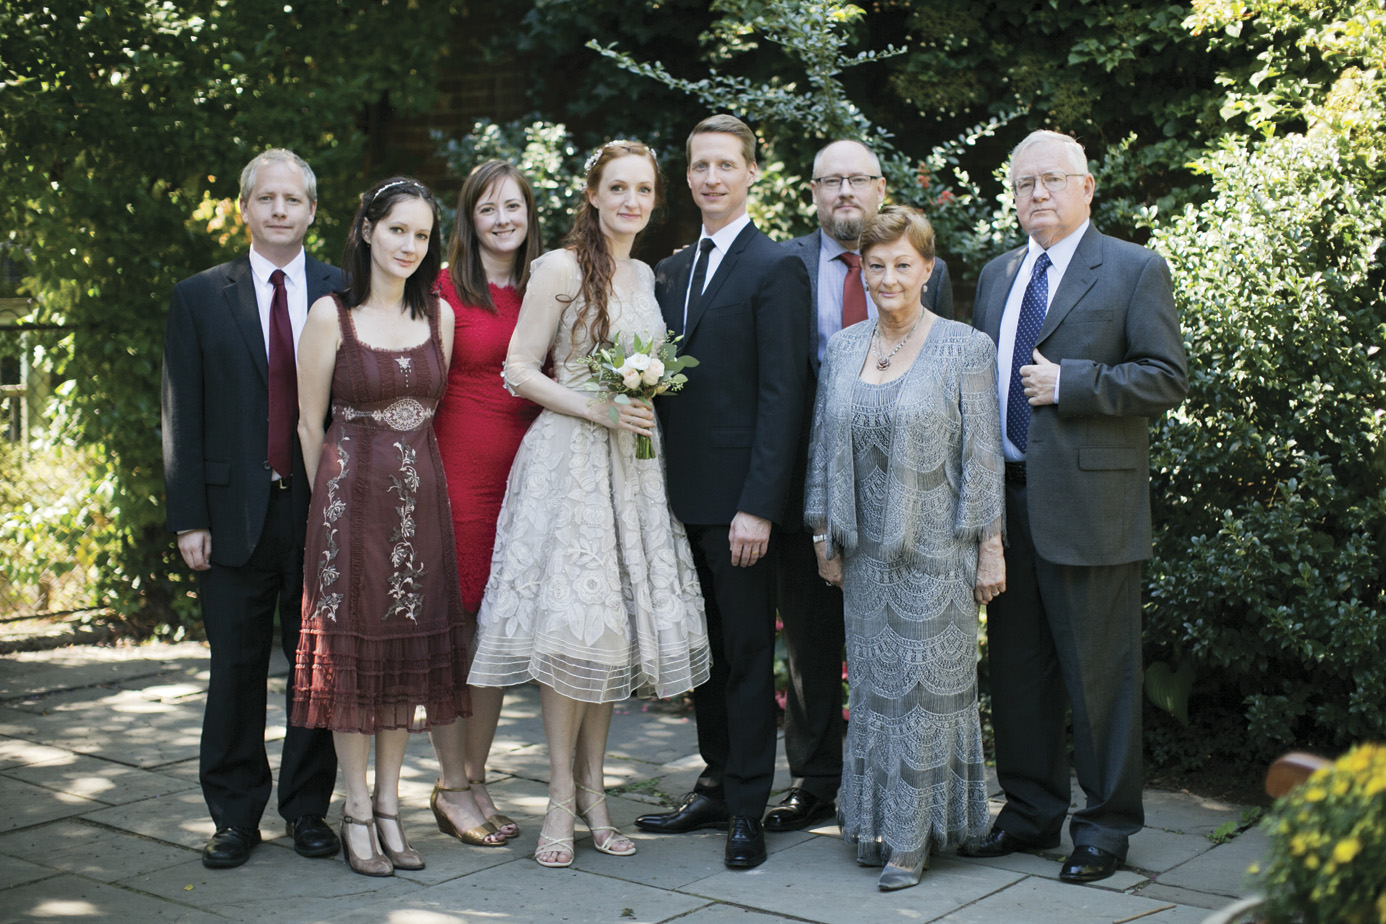 Wedding day, September 19, 2015. Pictured with the Murphy side of the family  (from left to right: Kevin, Tessa, Amy (Kevin’s fiance), Gillian, Ethan, Thad, Carol (mom), Paul (dad) Murphy. (Photo: Mel Barlow)